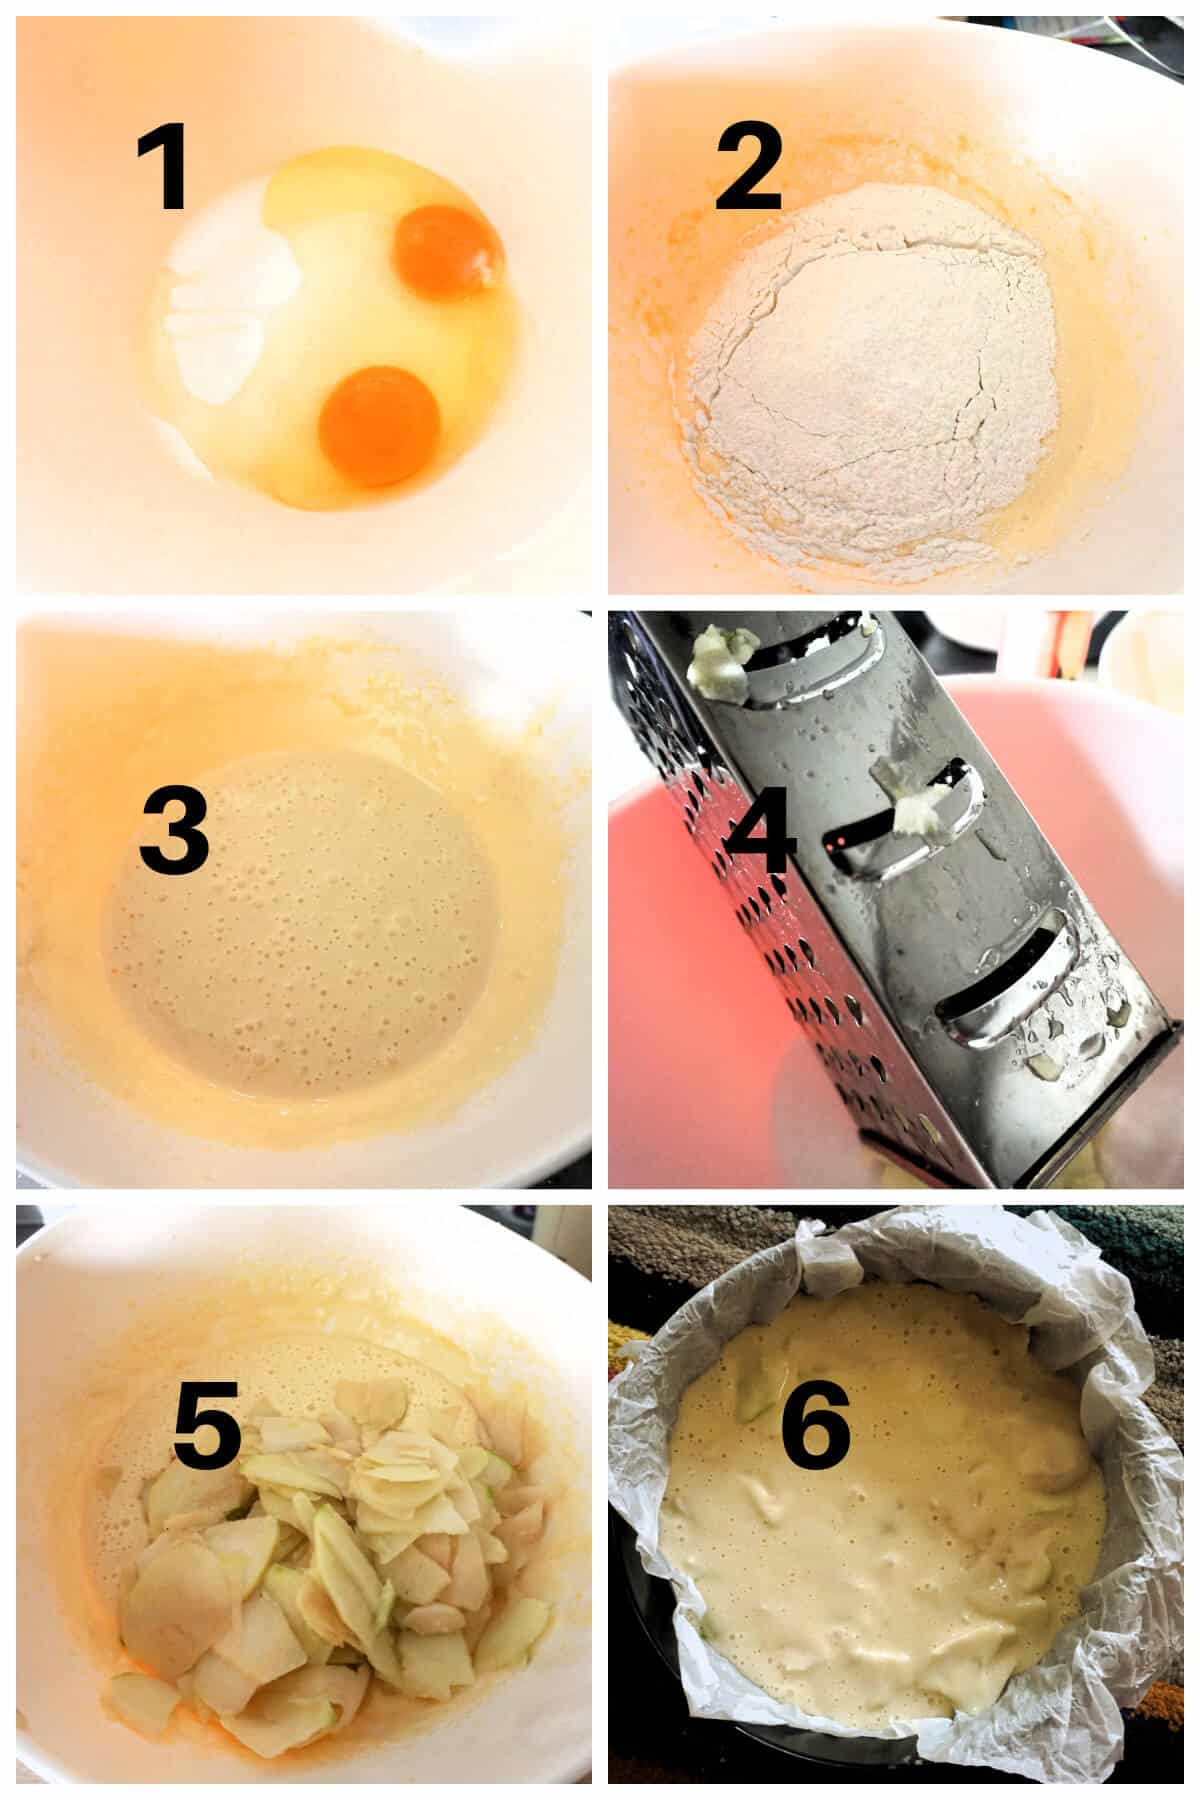 Collage of 6 photos to show how to make apple cake.